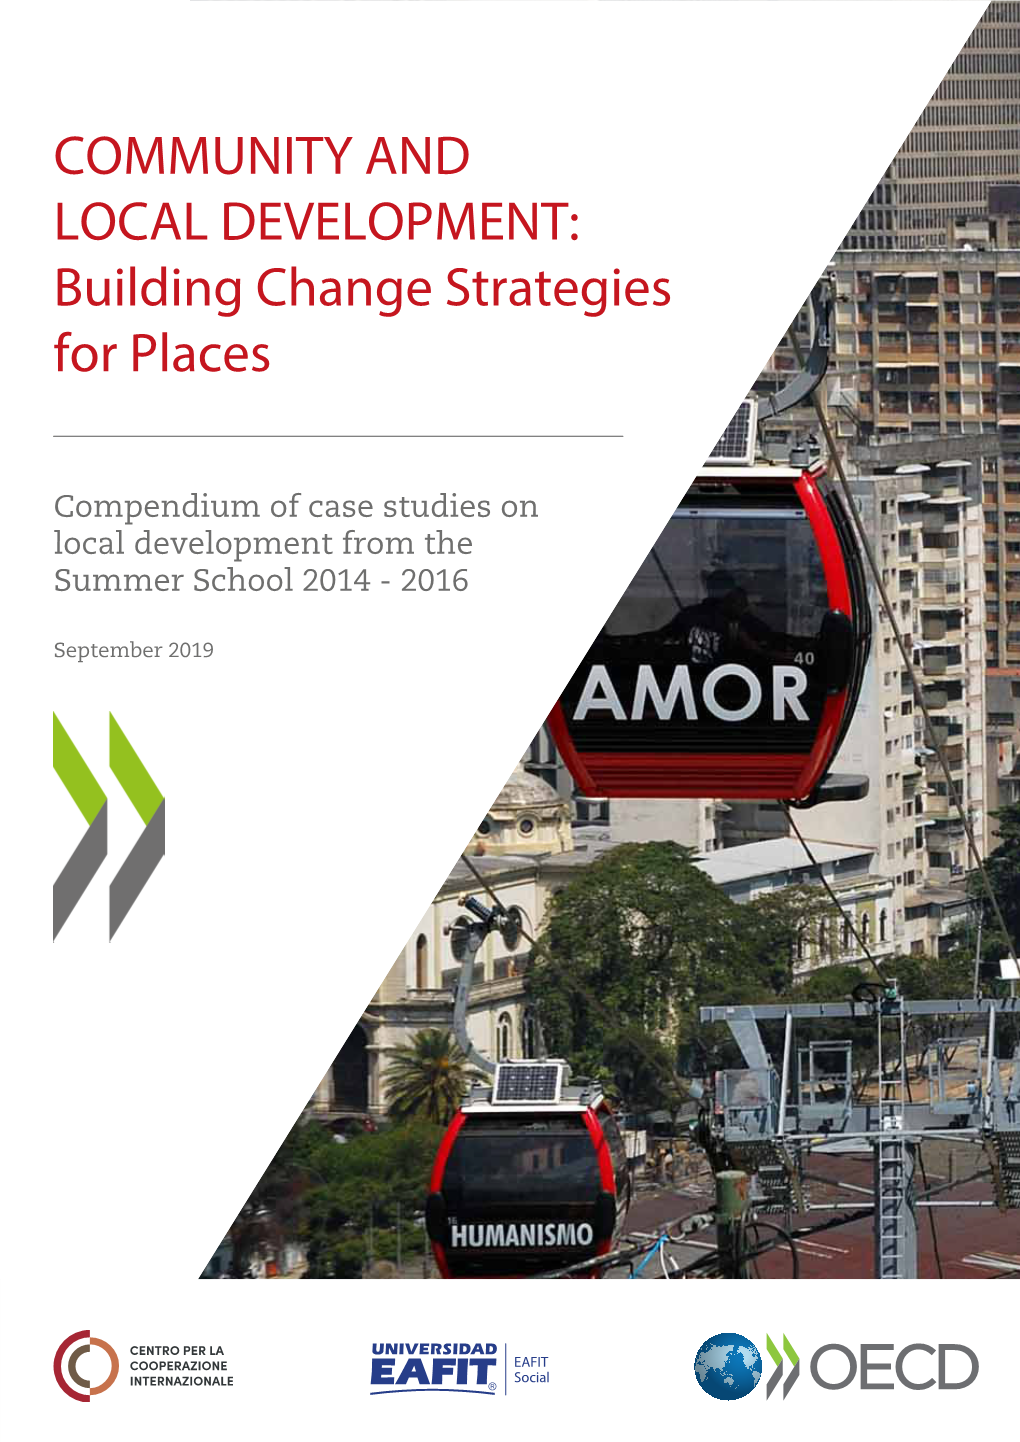 COMMUNITY and LOCAL DEVELOPMENT: Building Change Strategies for Places